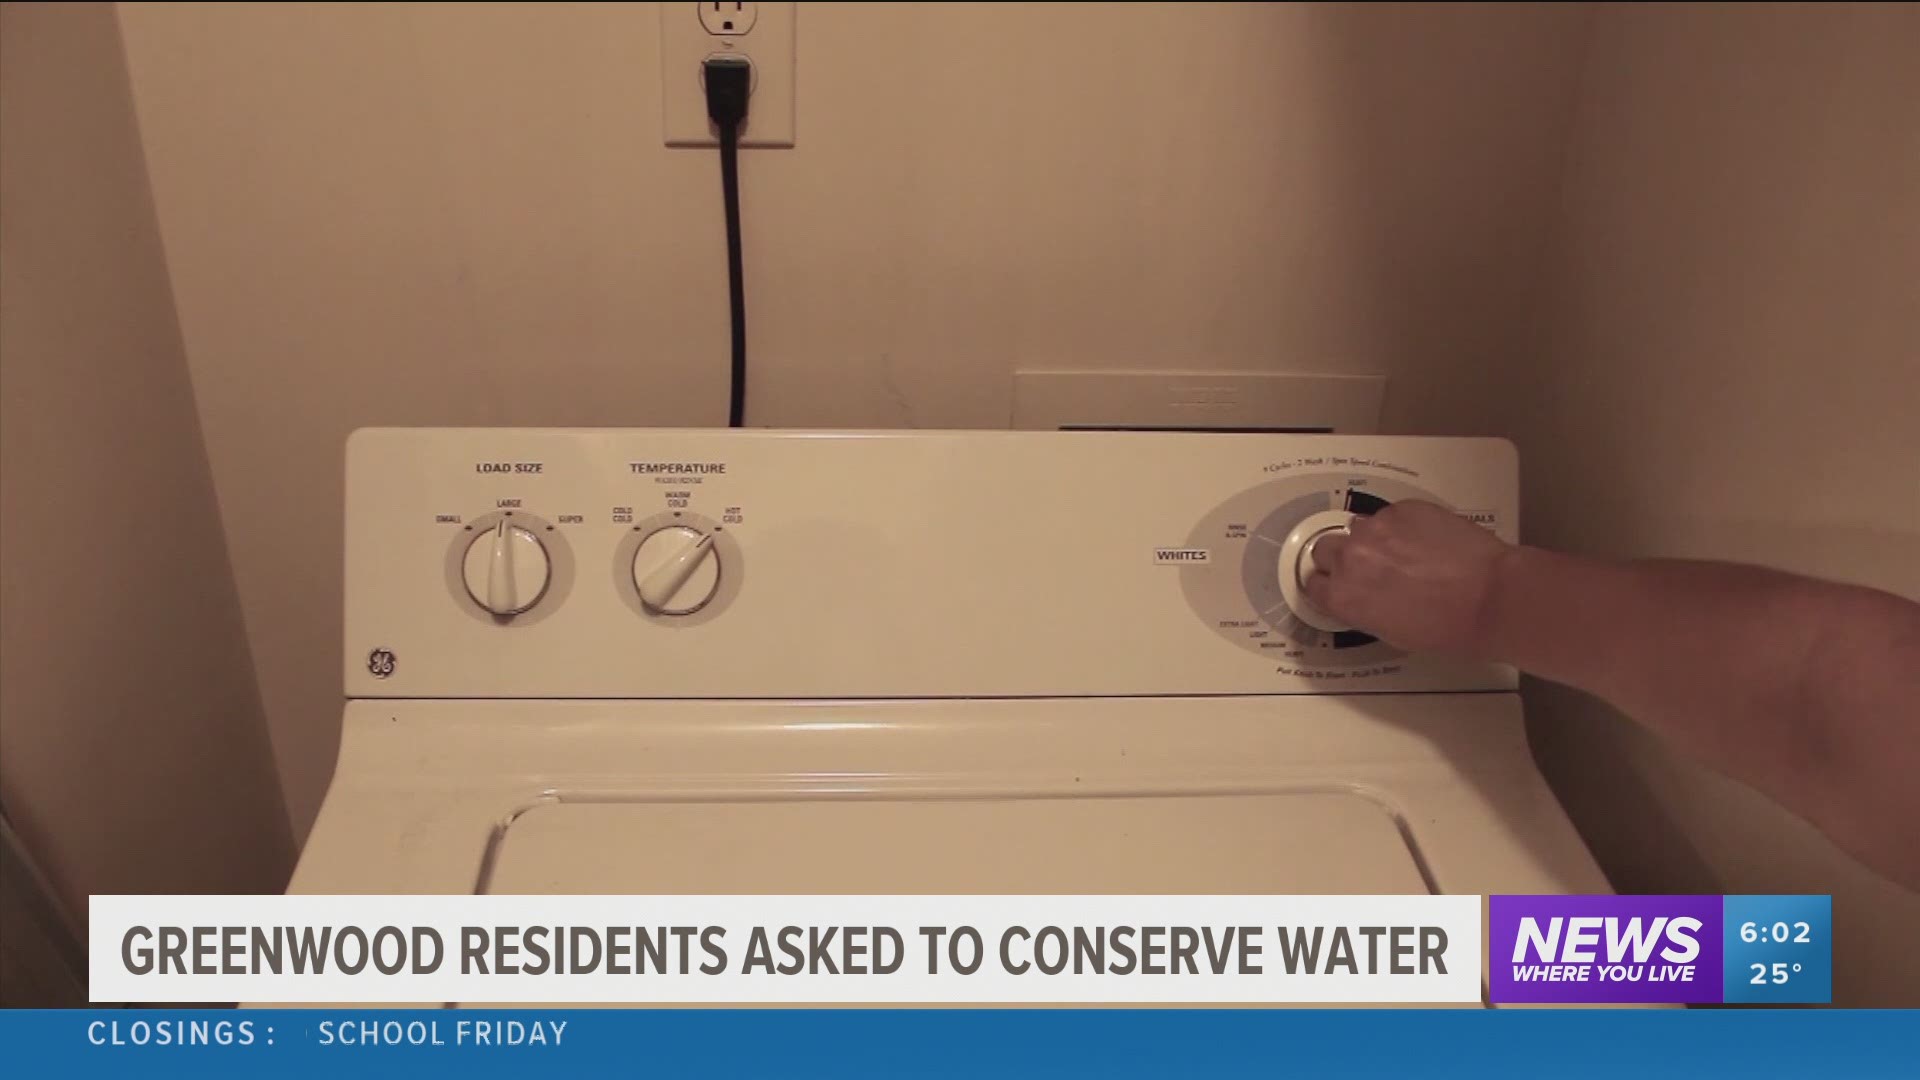 Greenwood residents asked to conserve water